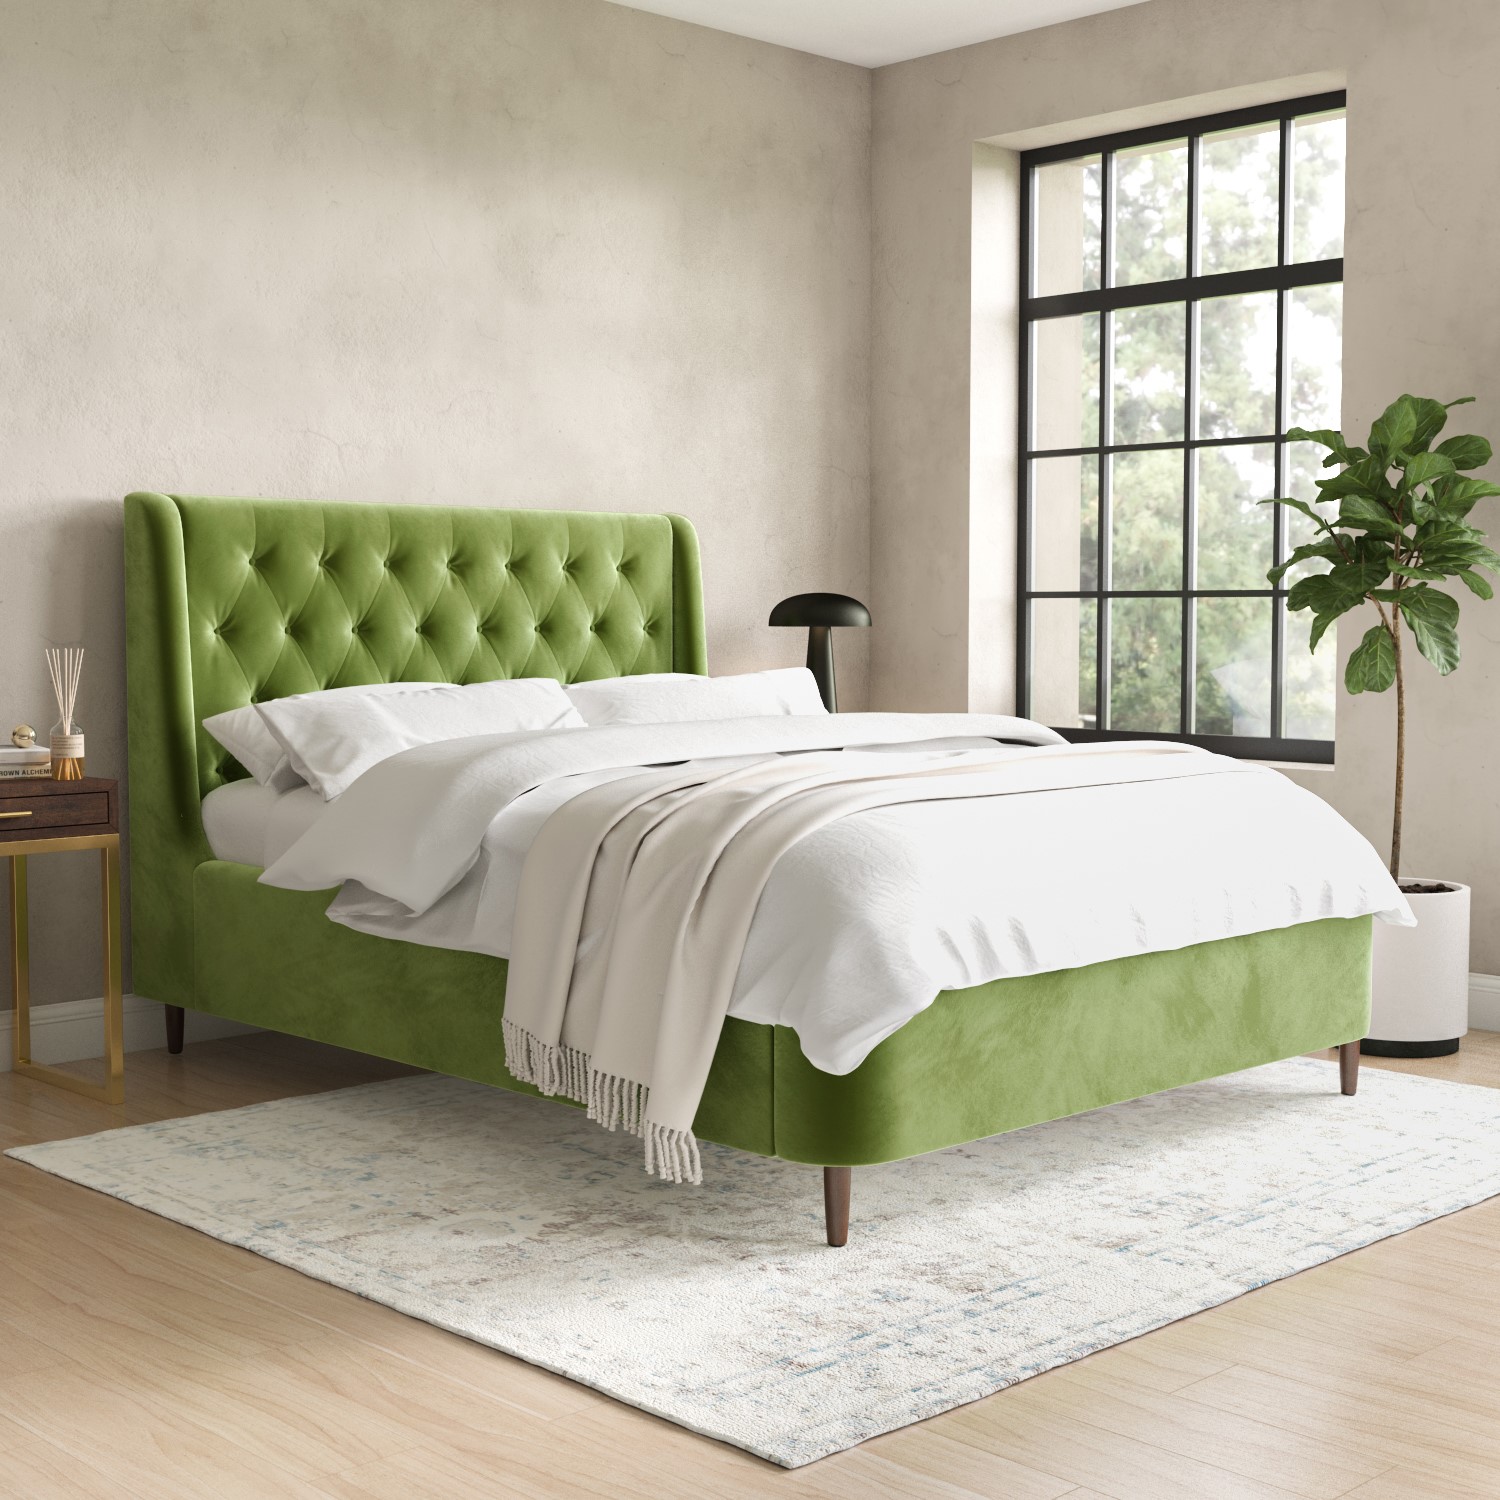 Photo of Olive green velvet king size ottoman bed with legs - amara